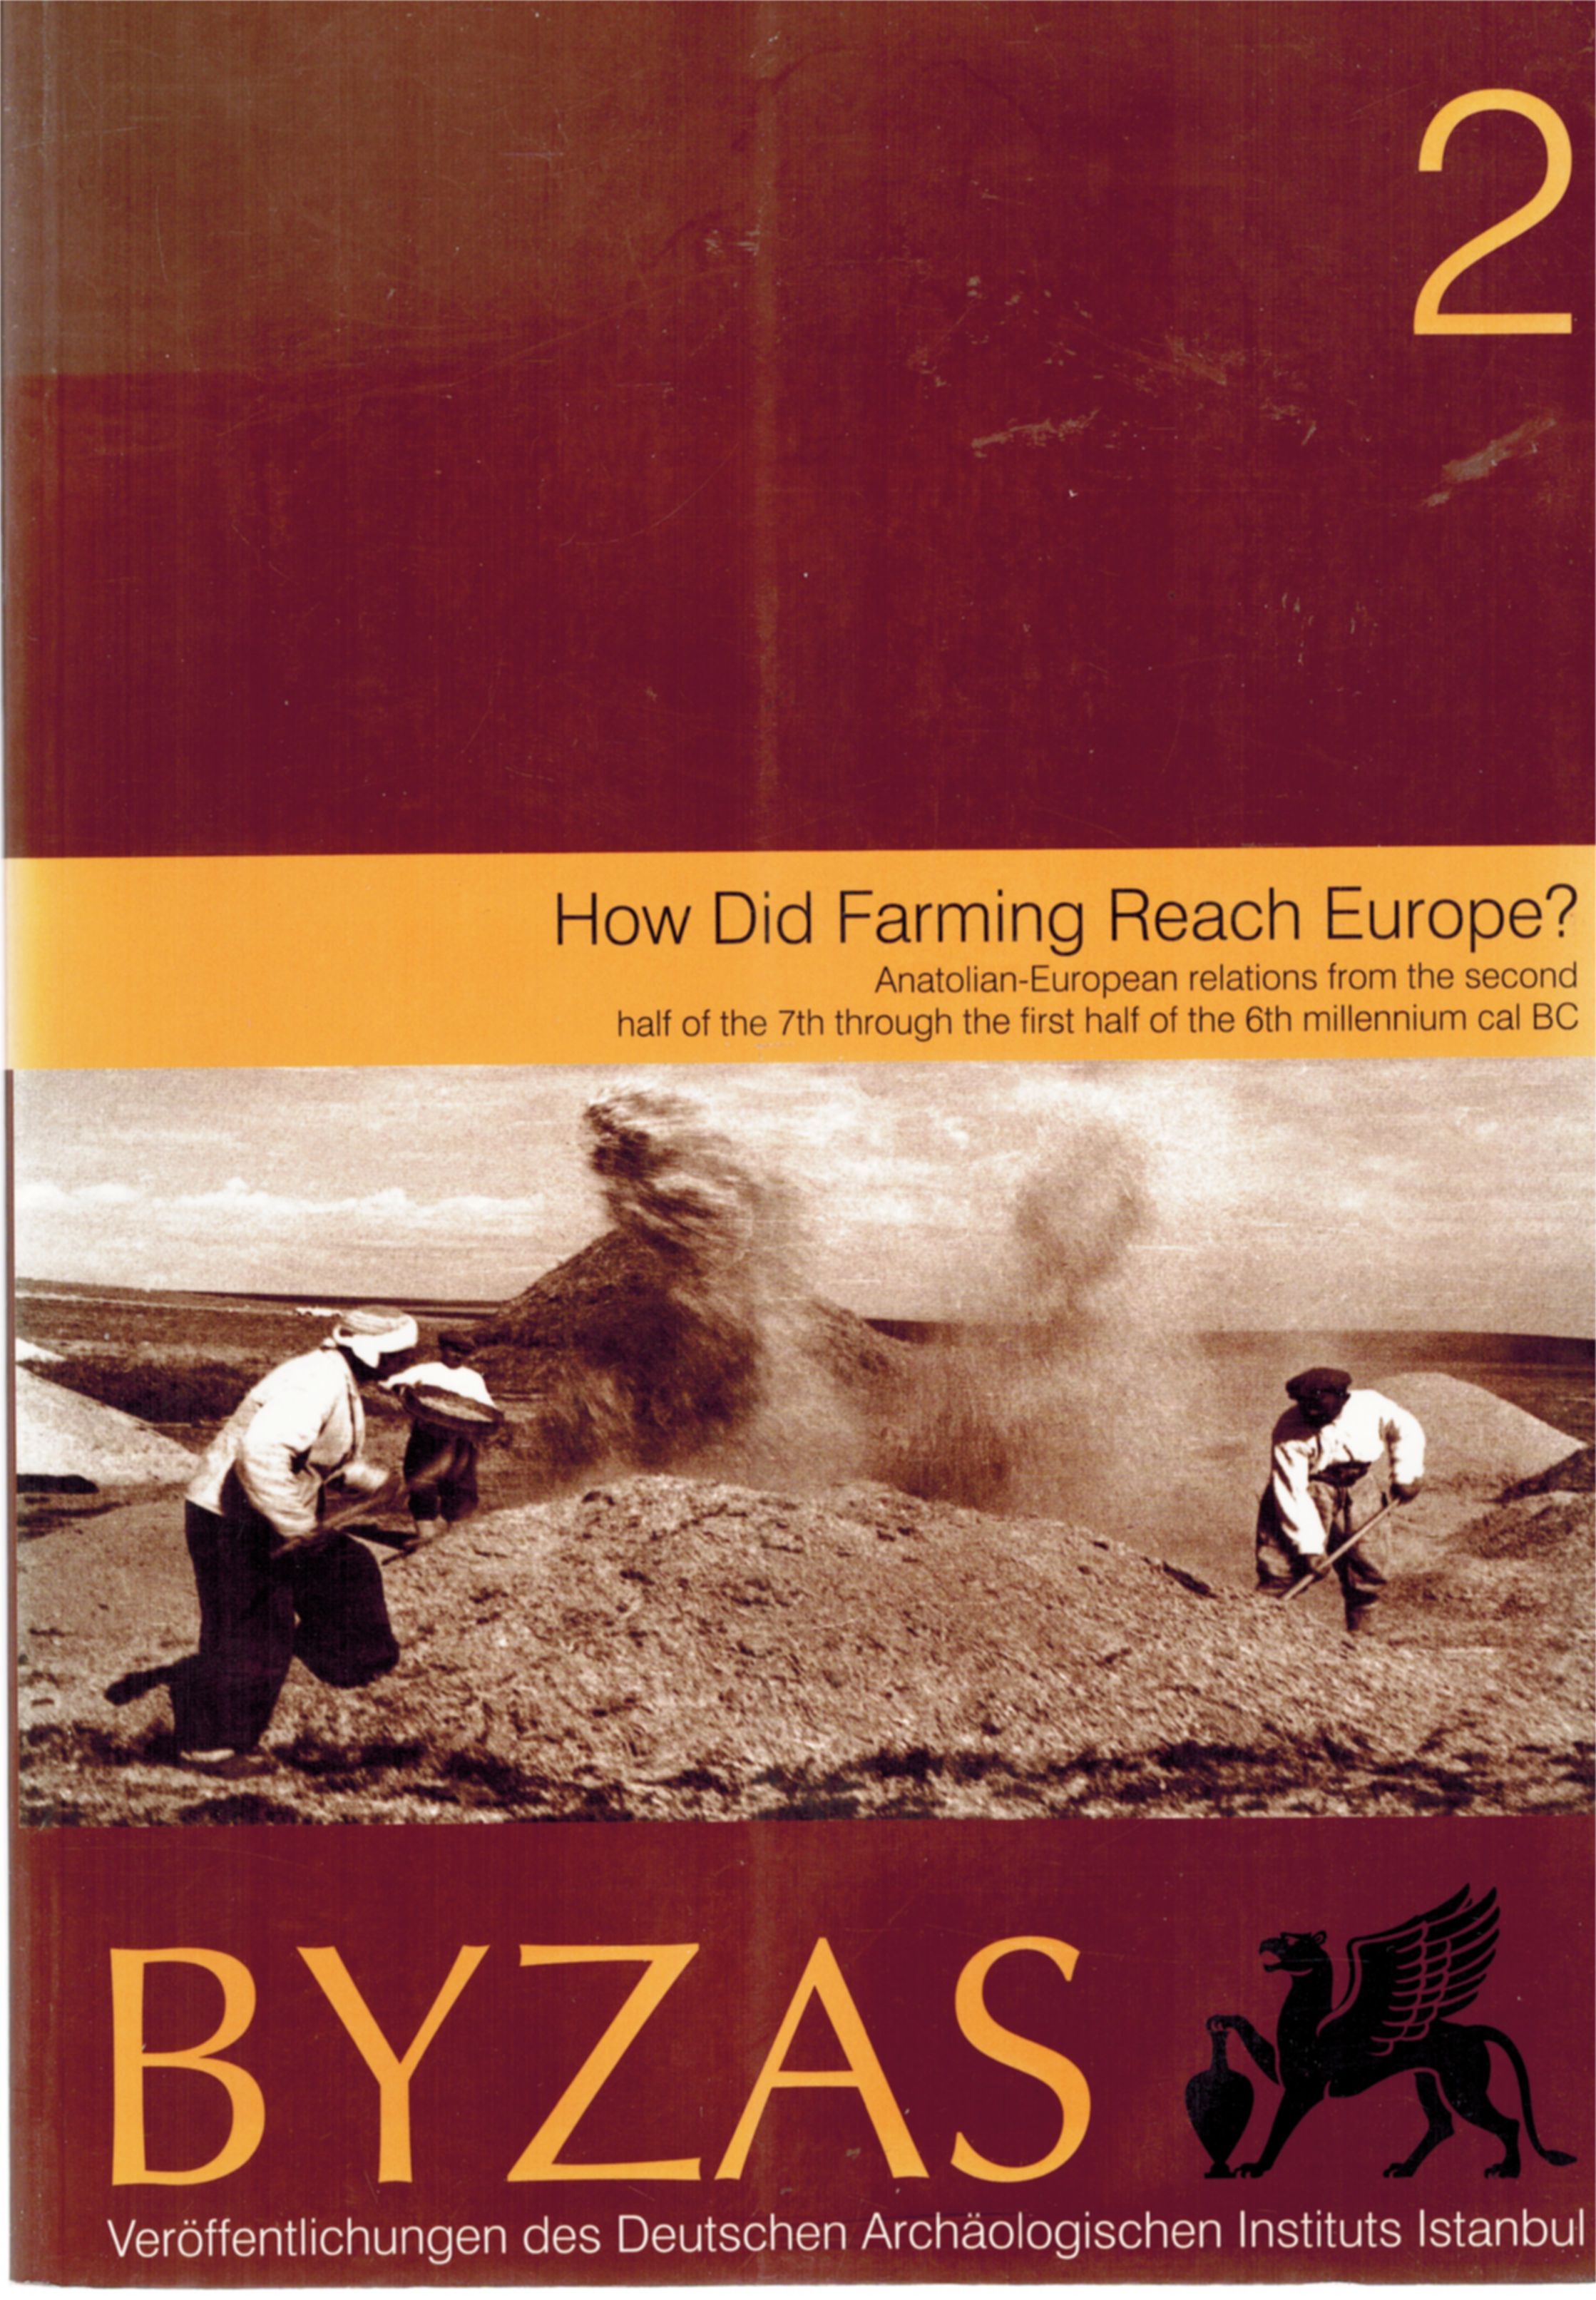 Image for How Did Farming Reach Europe? Anatolian-European relations from the second half of the 7th through the first half of the 6th millennium cal BC (Byzas)